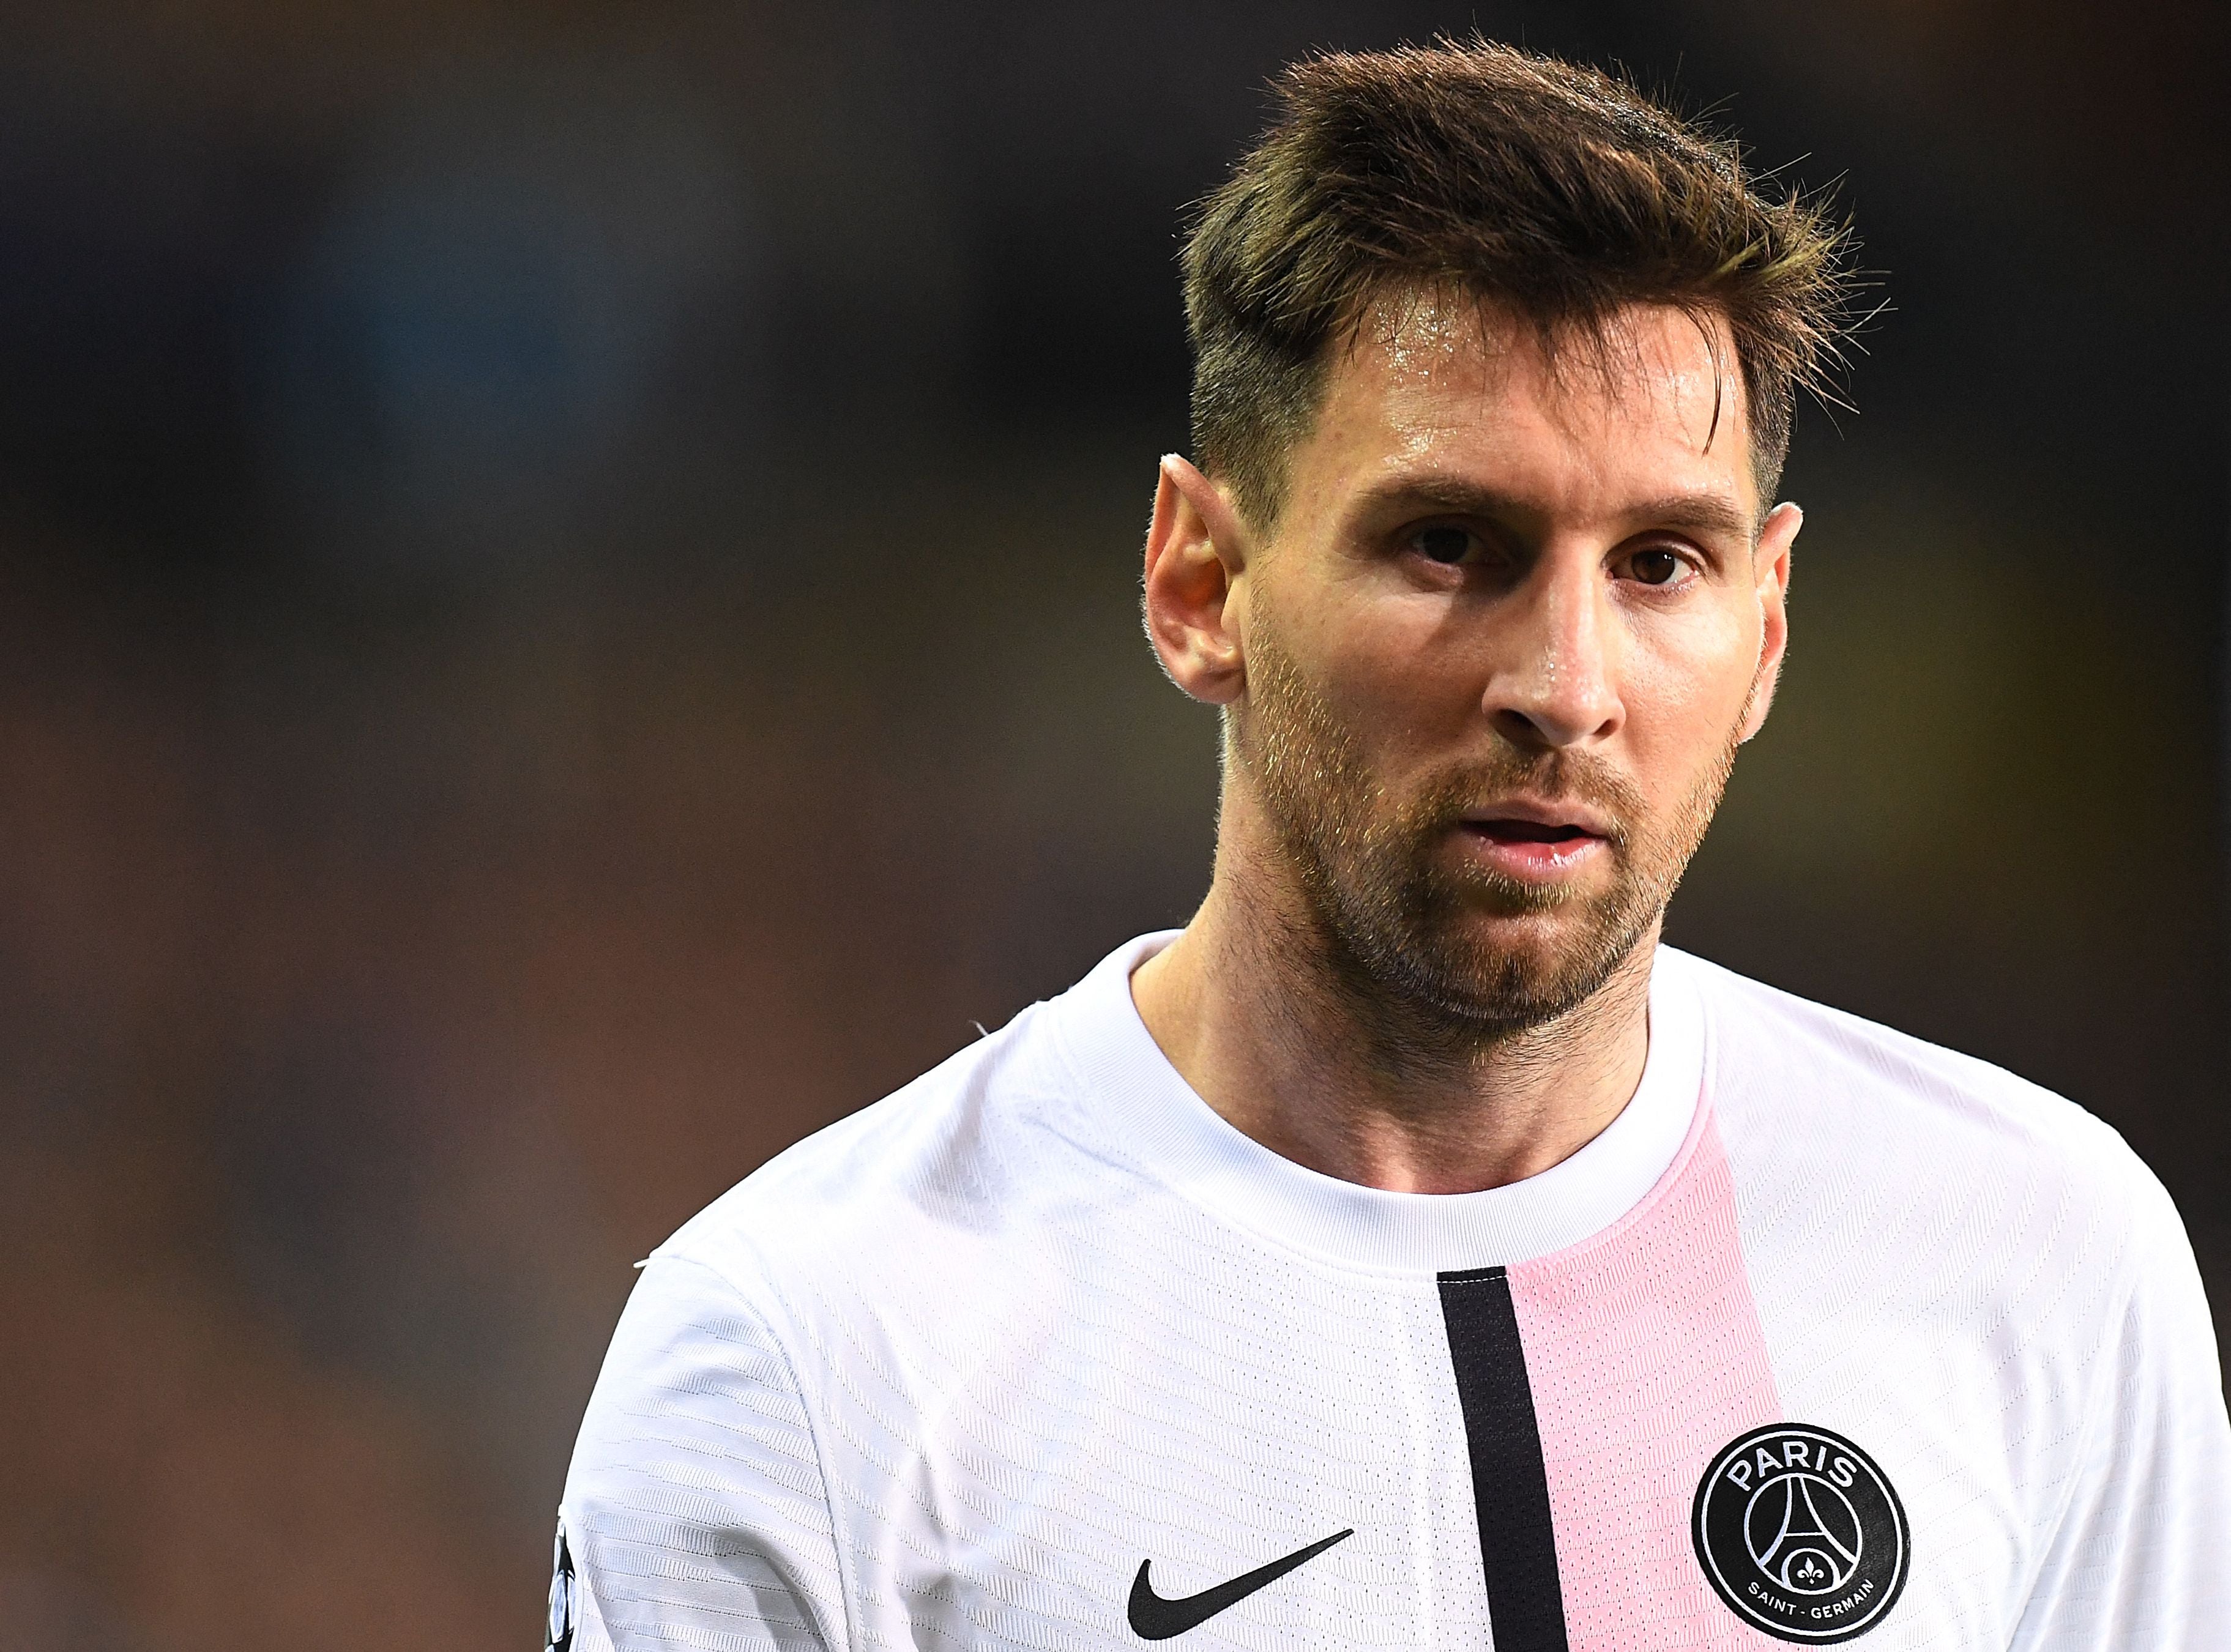 Lionel Messi made his first Champions League appearance for PSG against Club Bruges